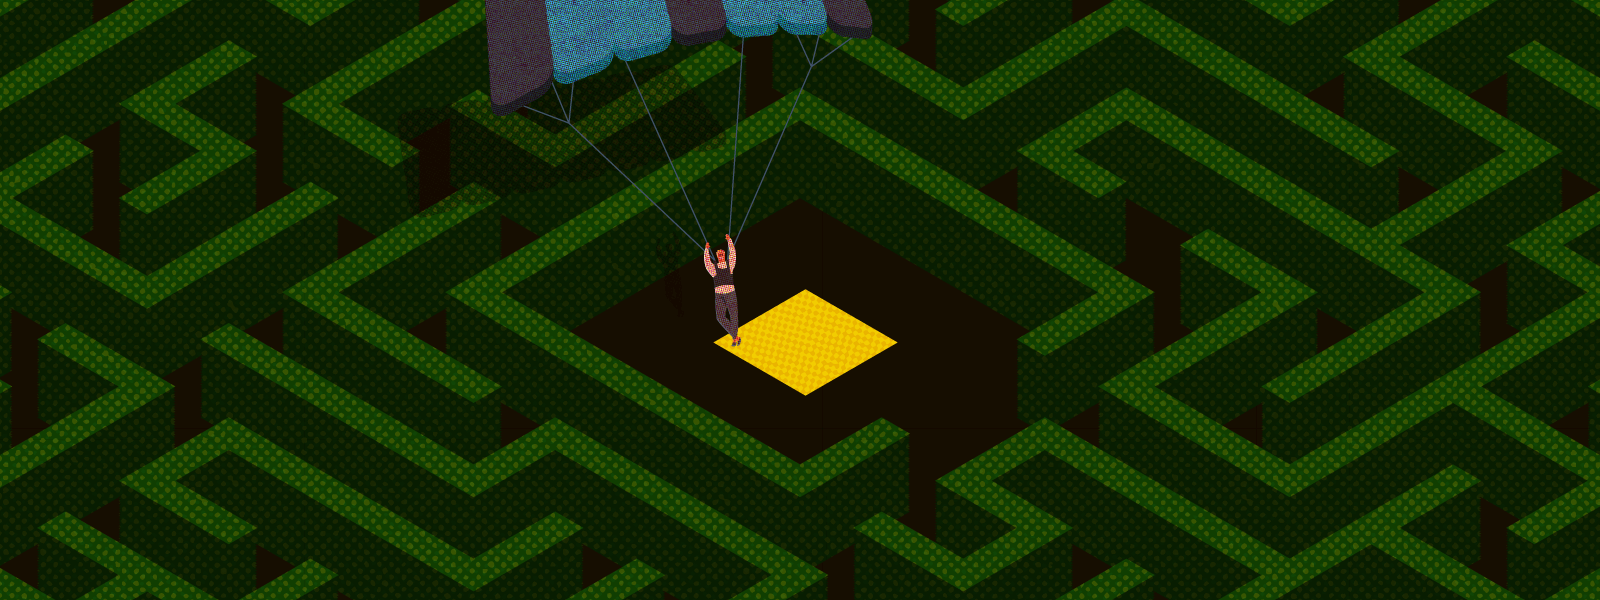 Illustration of a white person parachuting into the center of the maze.